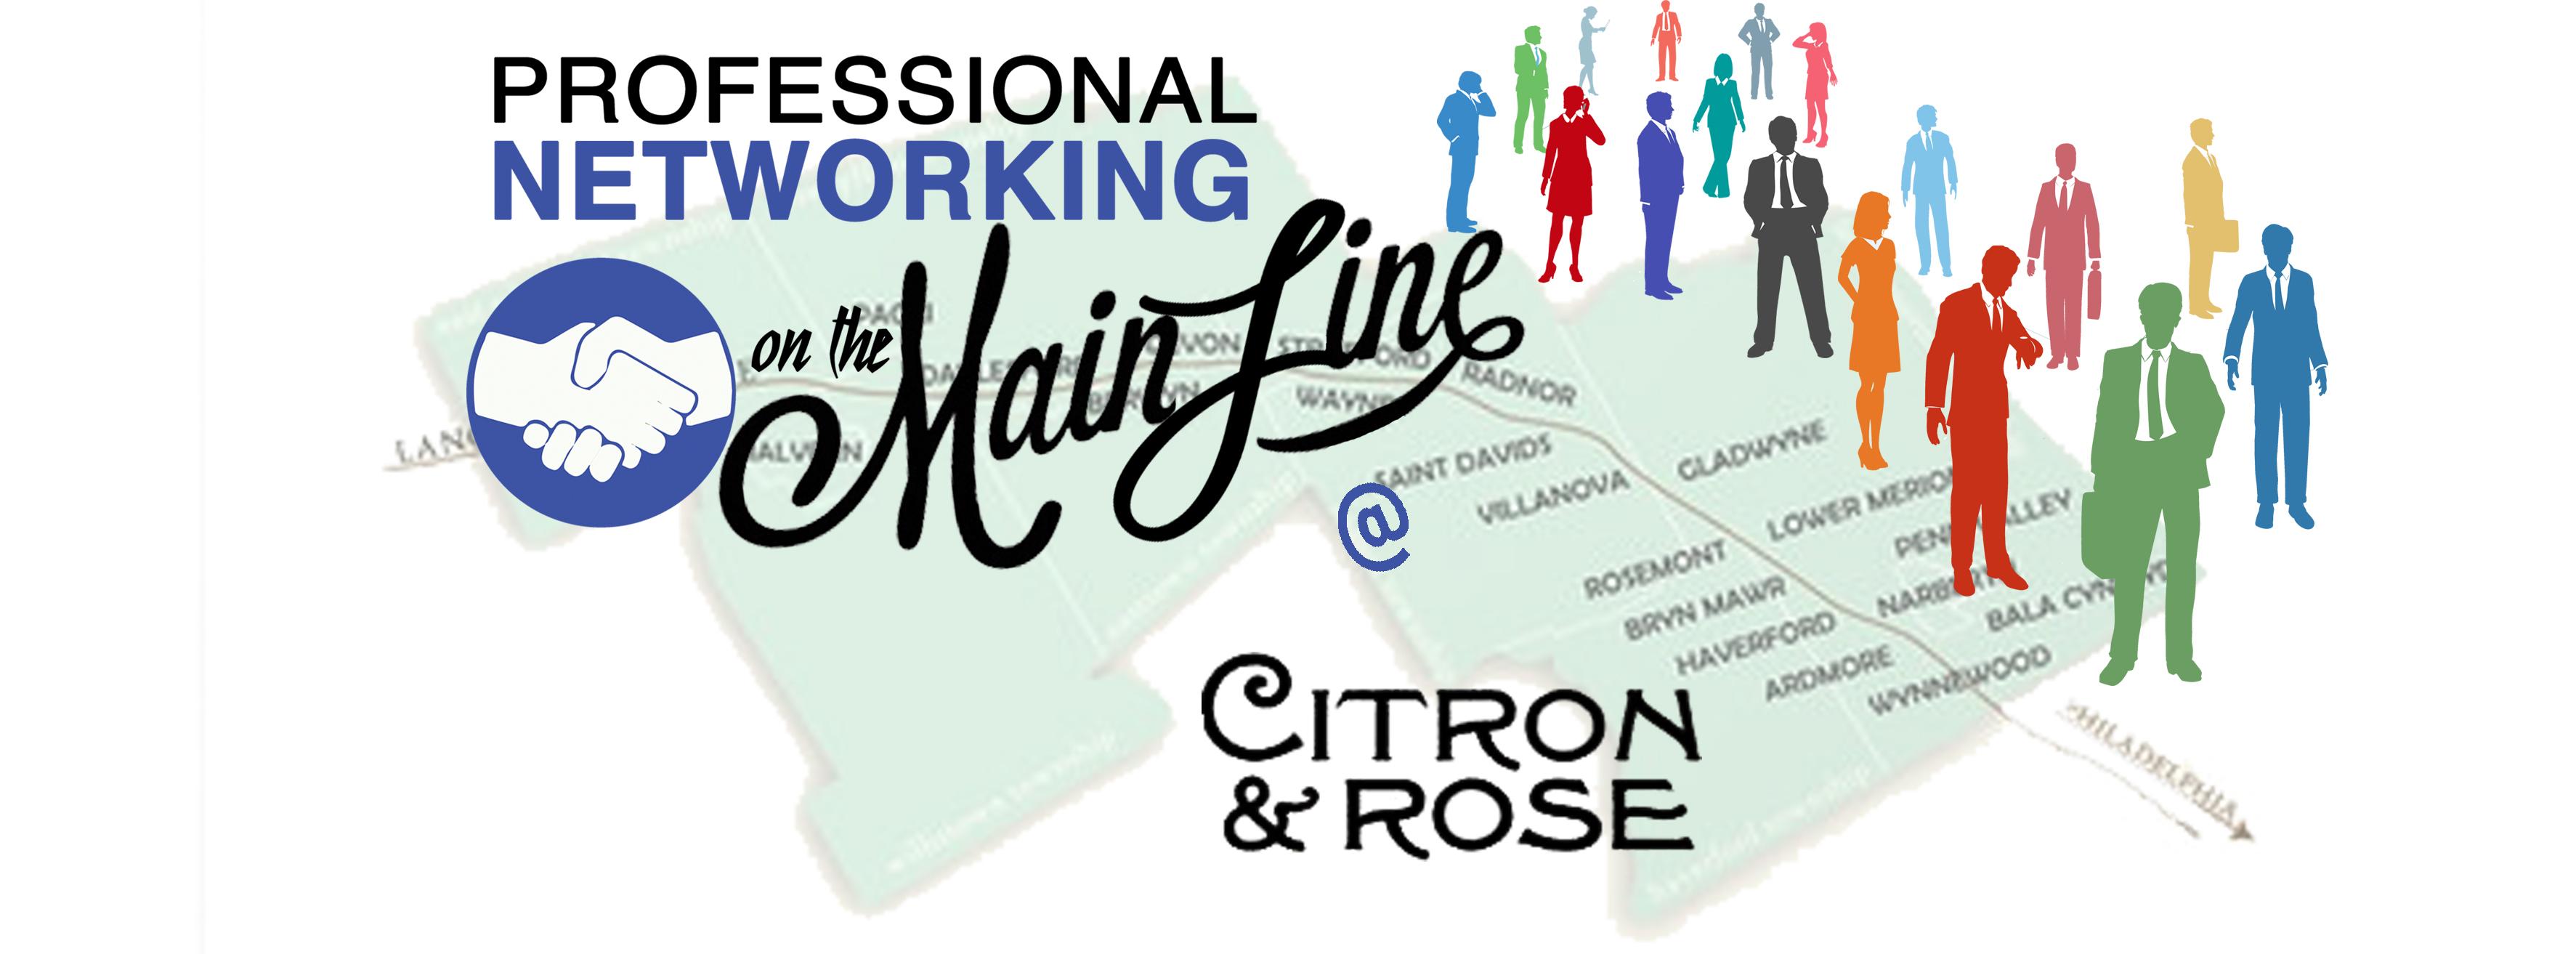 Professional Networking on the Main Line Live